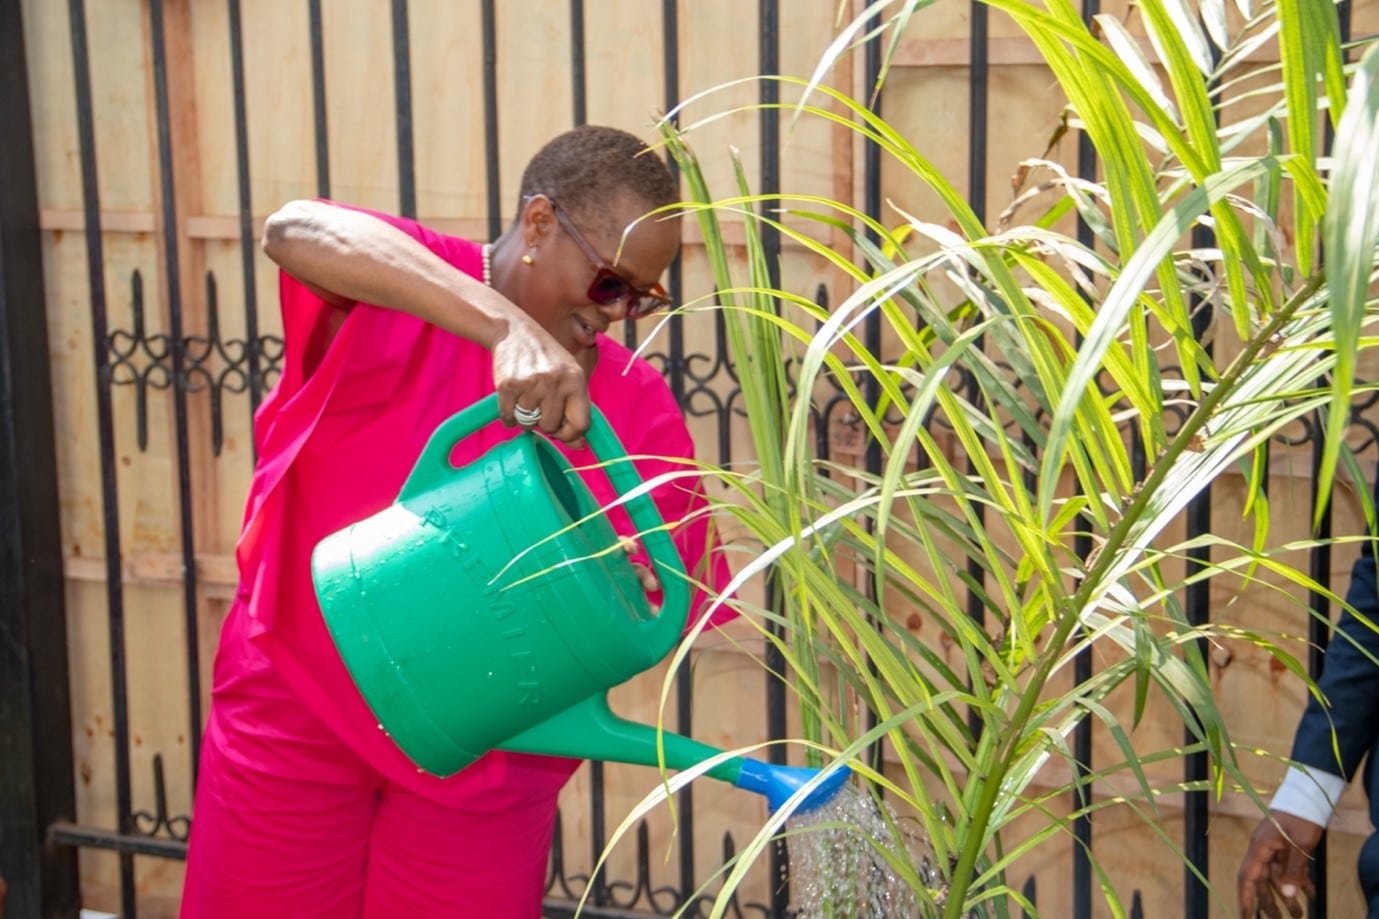 A woman waters a newly-planted sapling with a watering can.